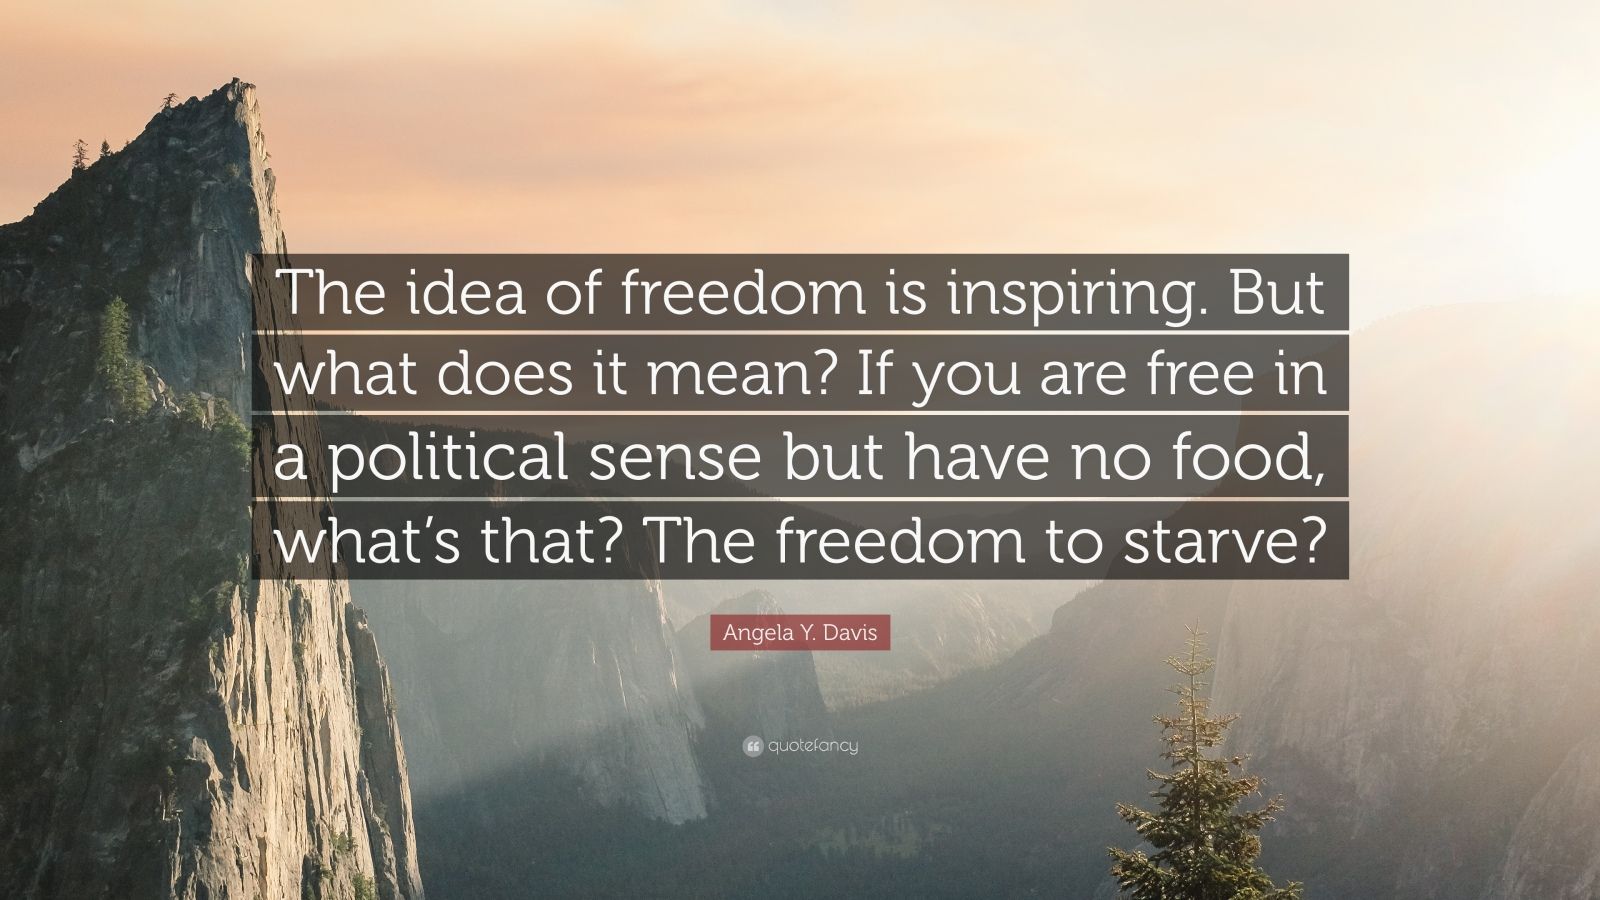 Angela Y. Davis Quote: “The idea of freedom is inspiring. But what does